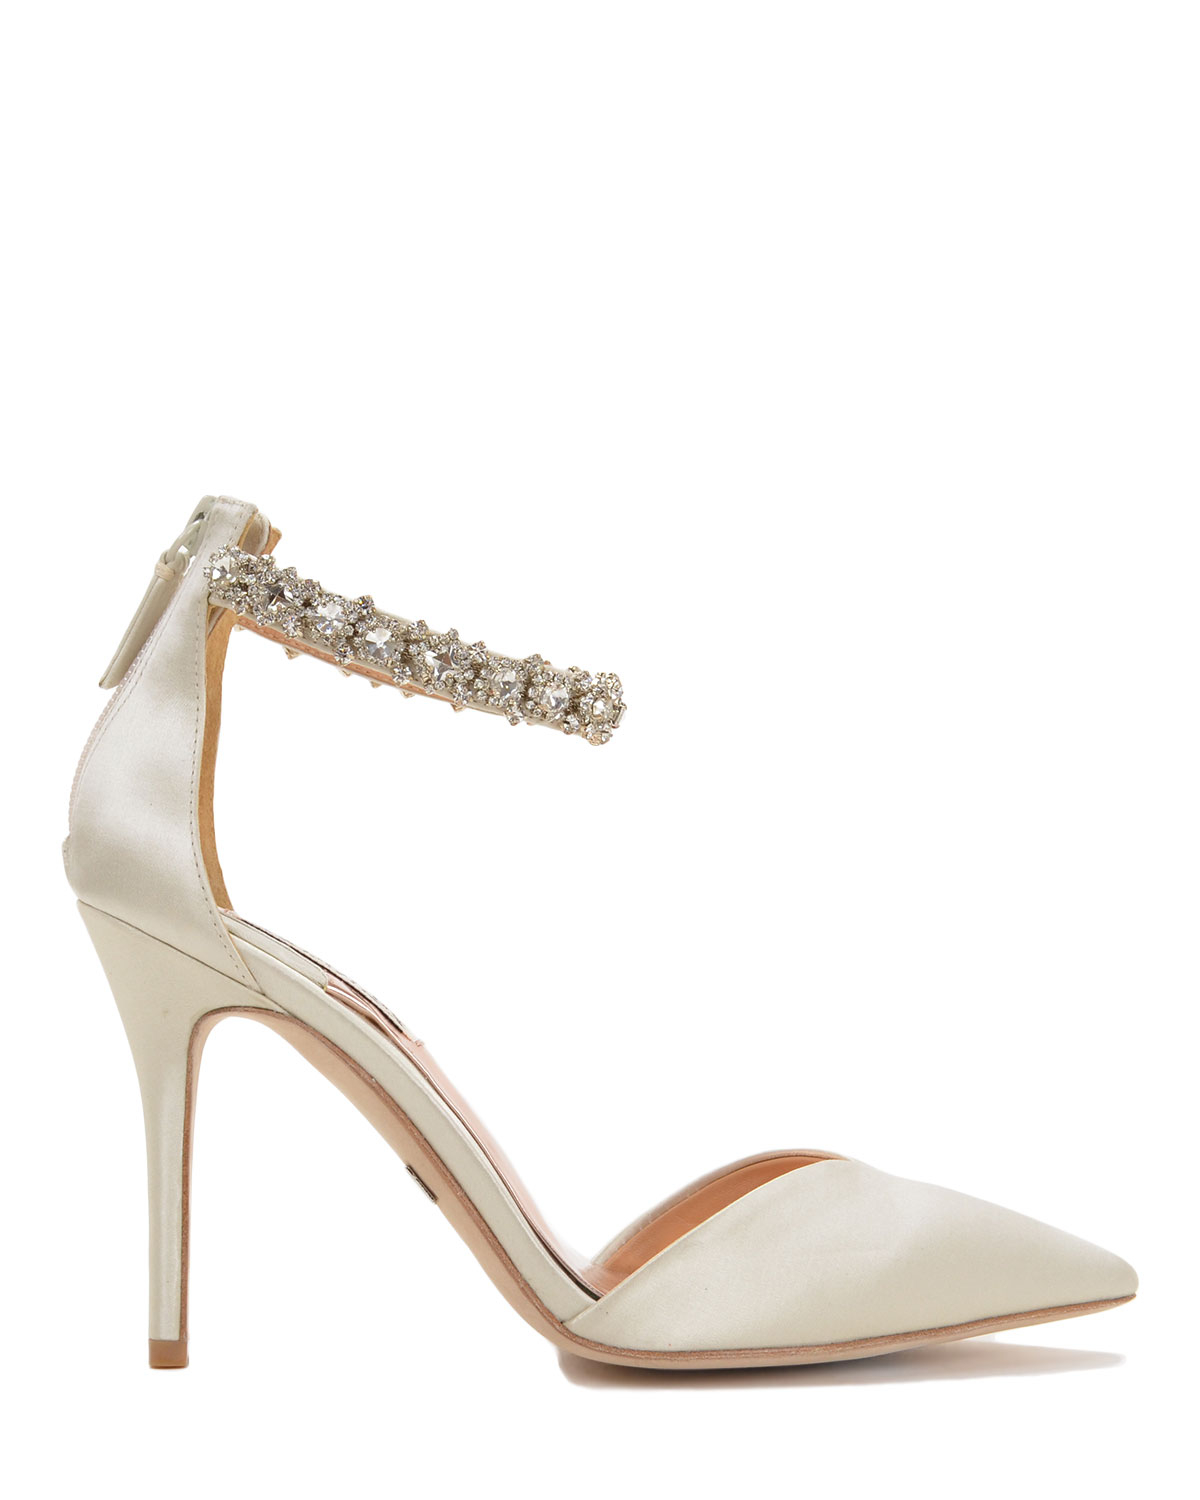 Badgley mischka Flash Ankle Strap Pointed Toe High Heel in White | Lyst